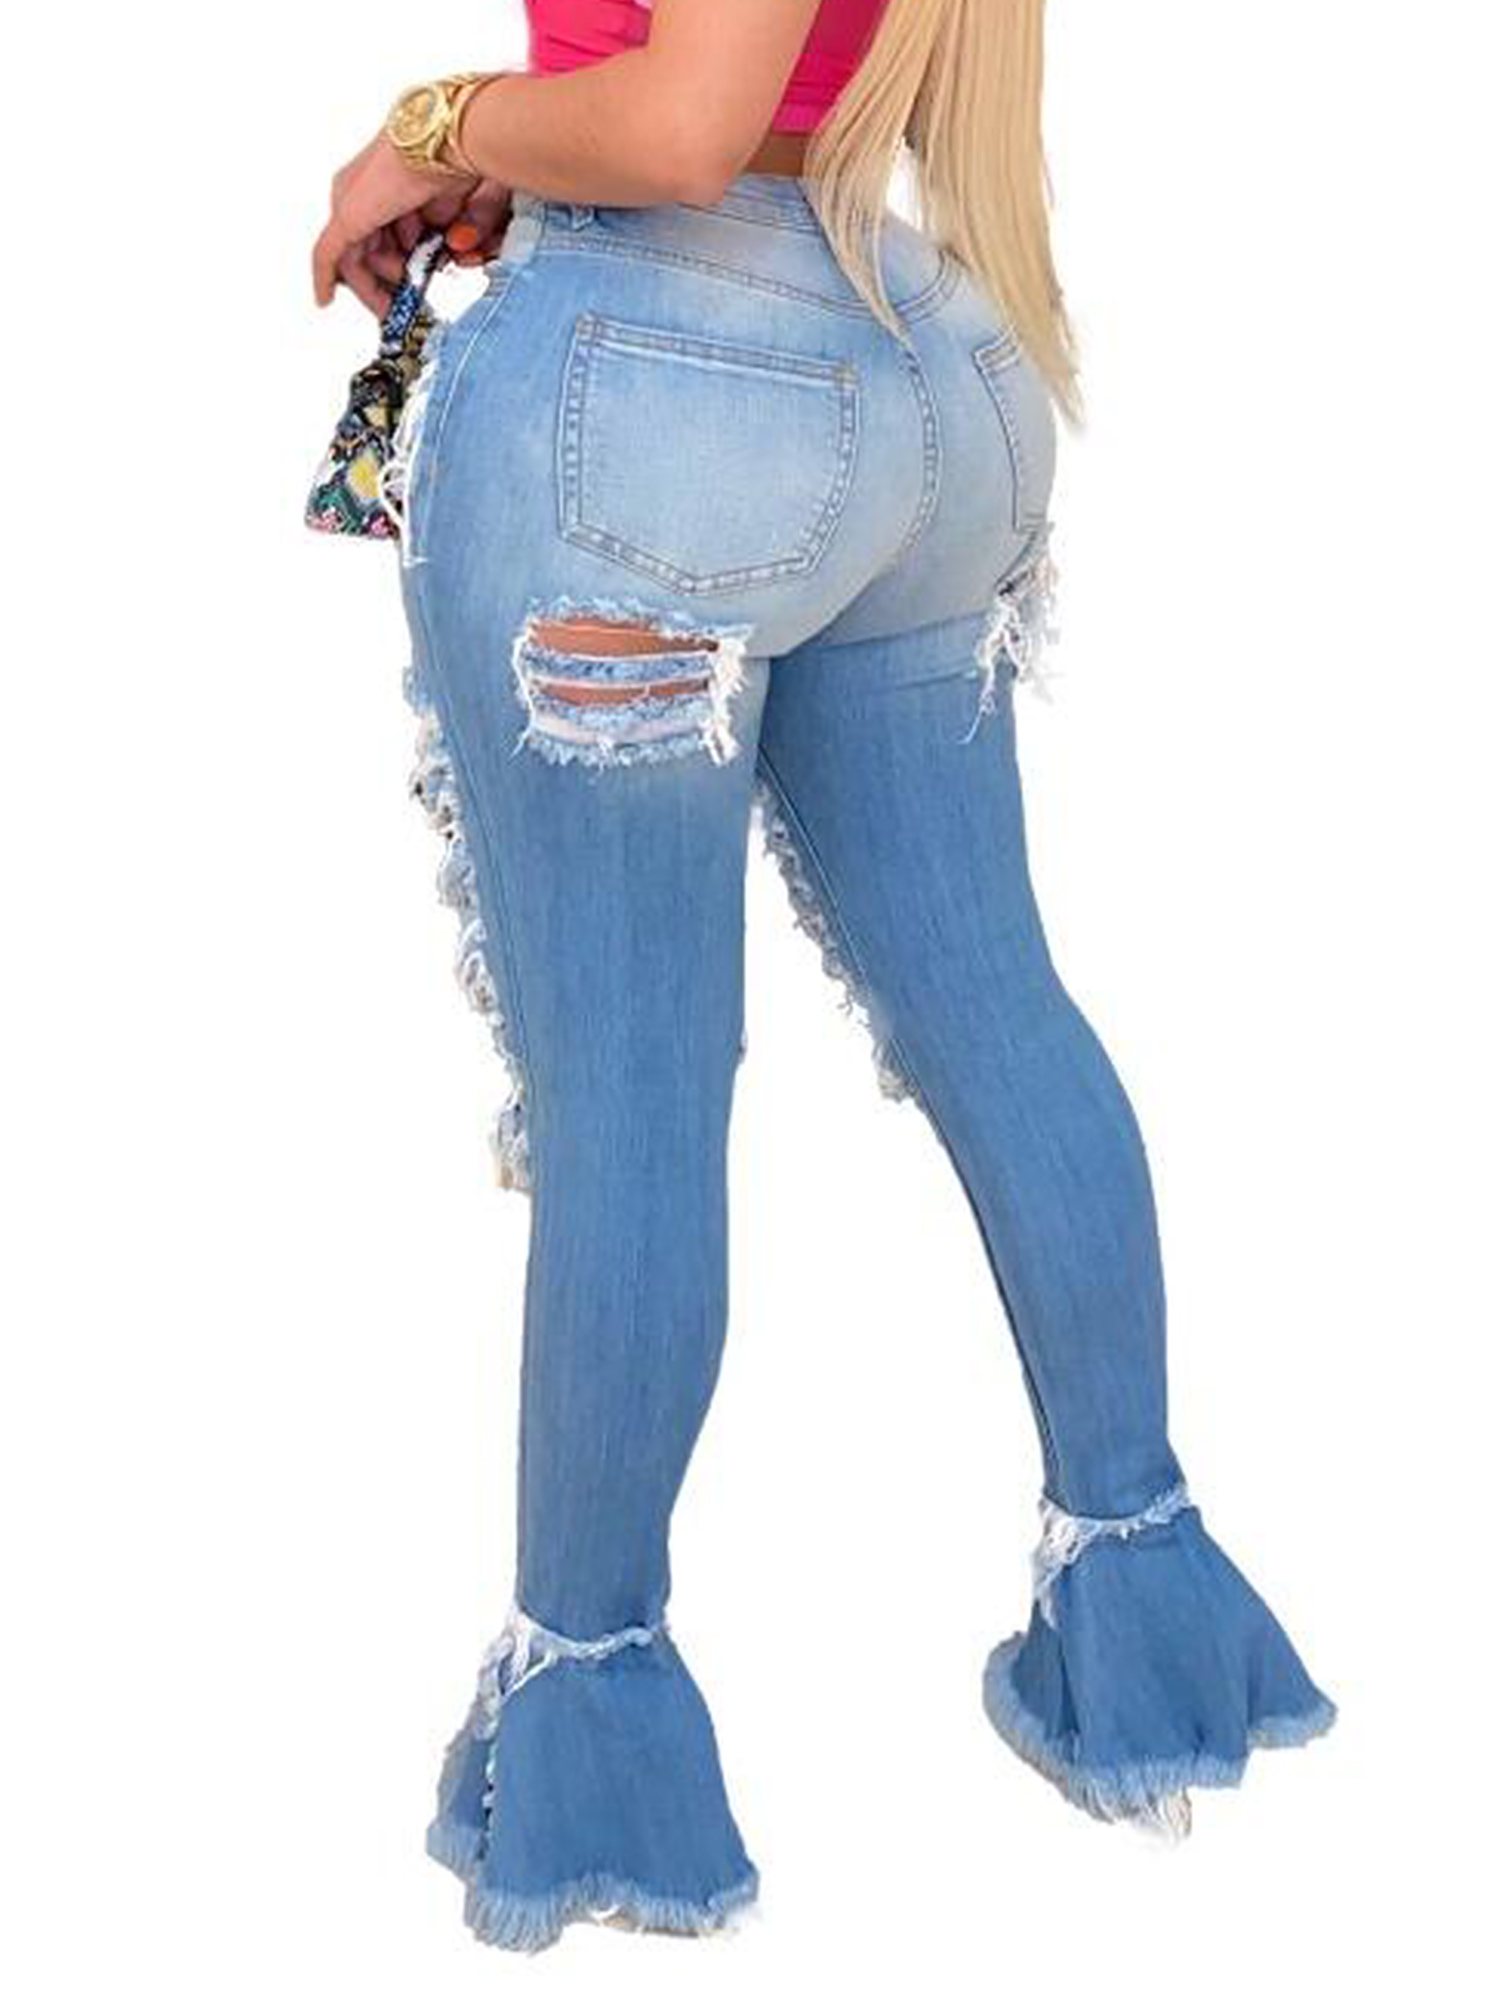 Women Casual Denim Jeans Pants Ladies Mid Waist Ripped Bell Bottom Jegging Trouser Pants Jeans with Hole - image 3 of 3